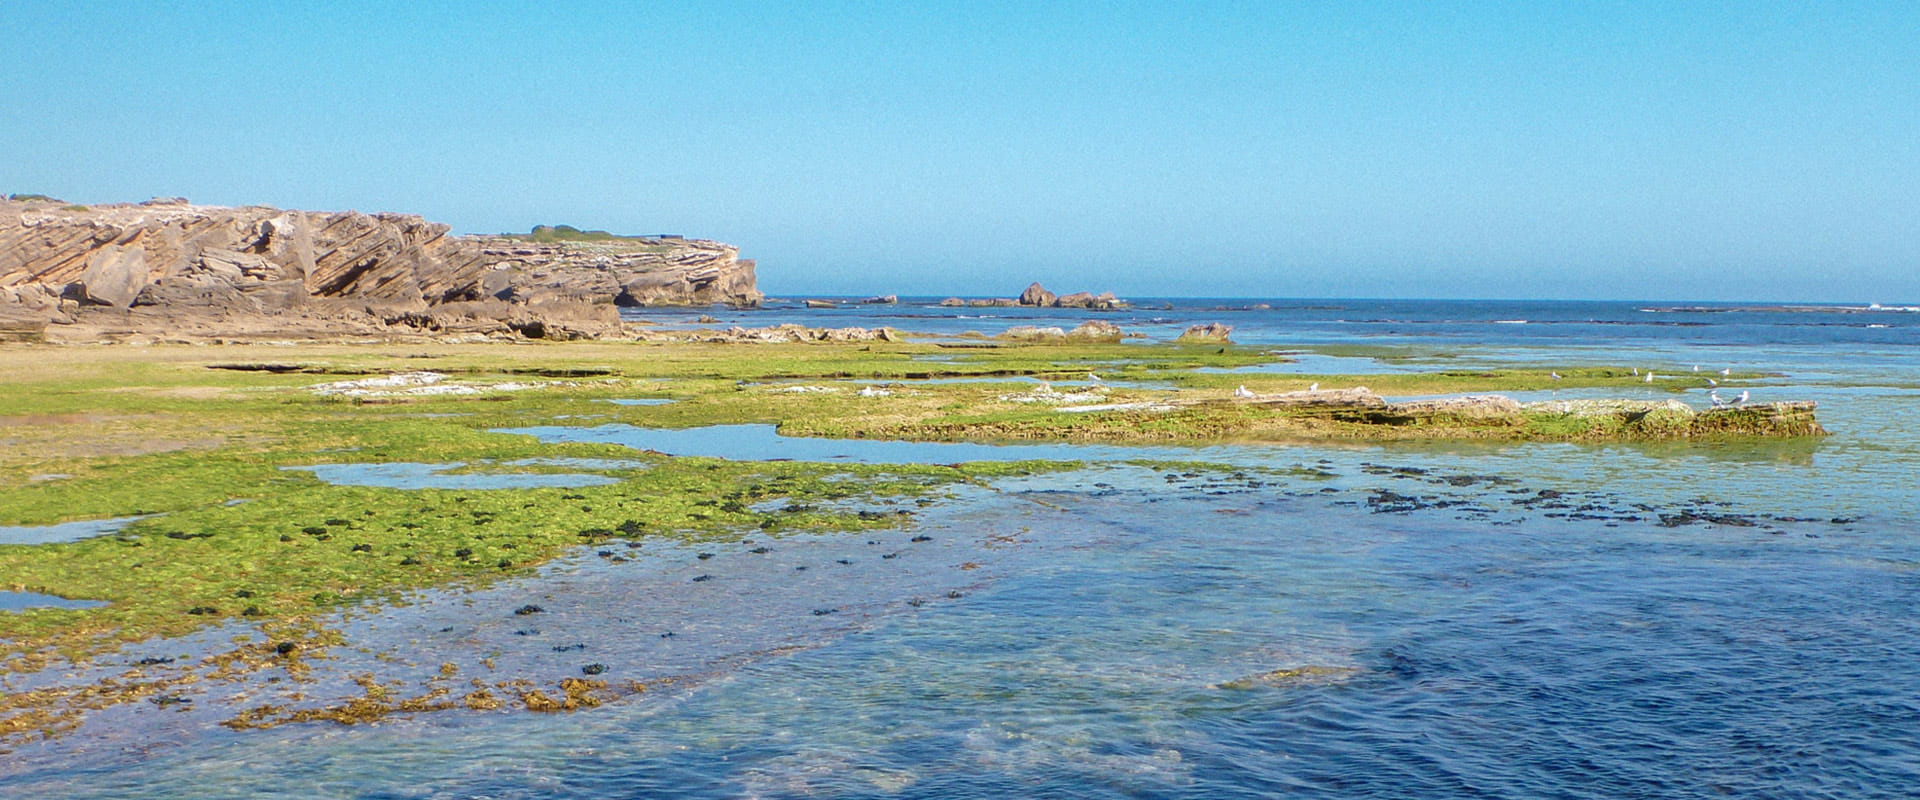 A view of a rocky seabed covered with green seagrass in a marine sanctuary by the coast.